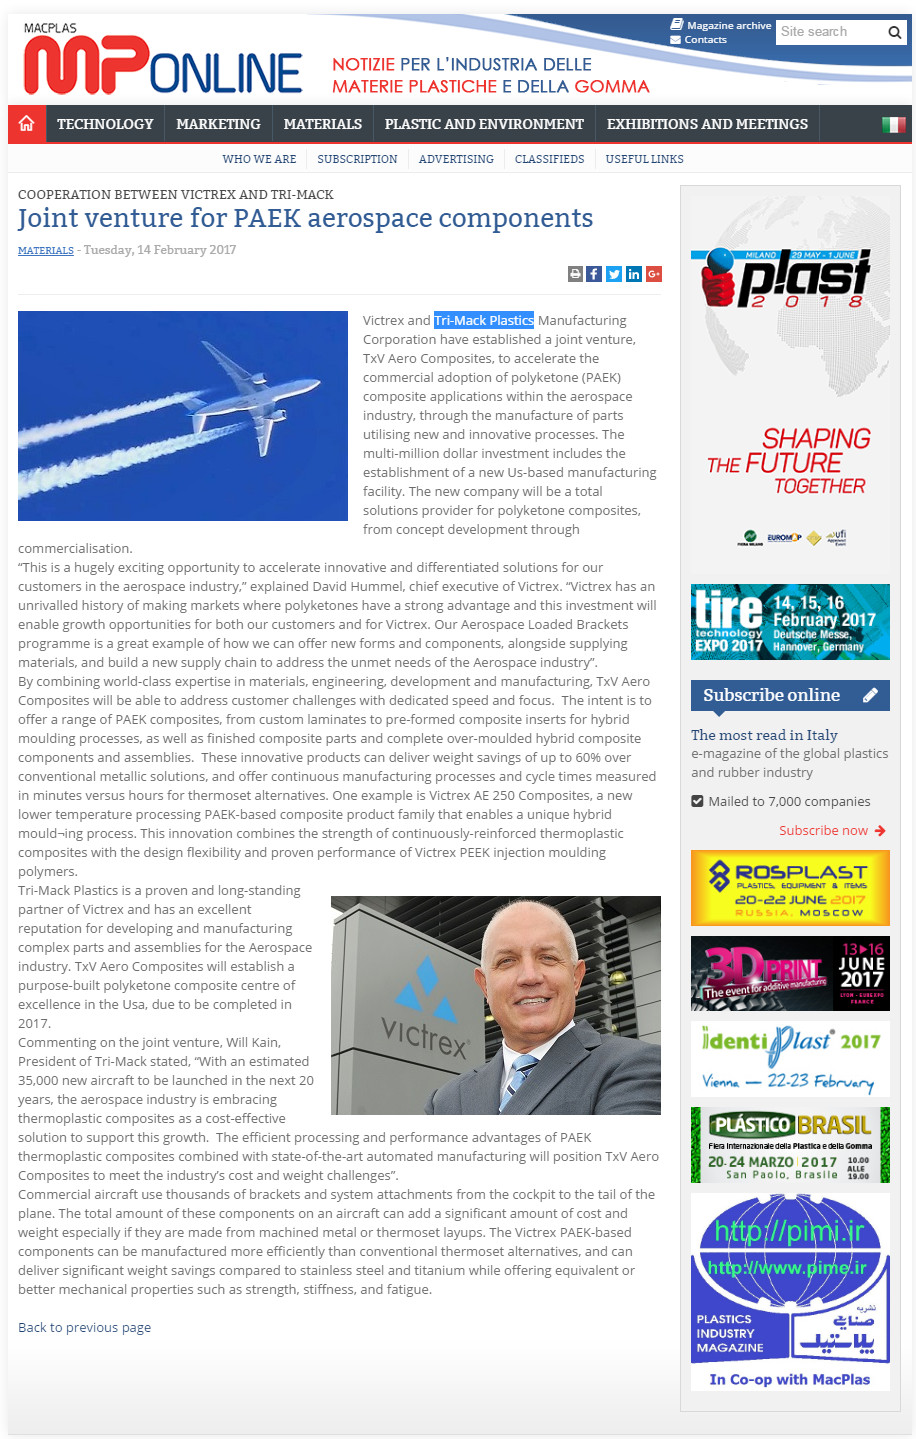 Joint Venture for PAEK Aerospace Components